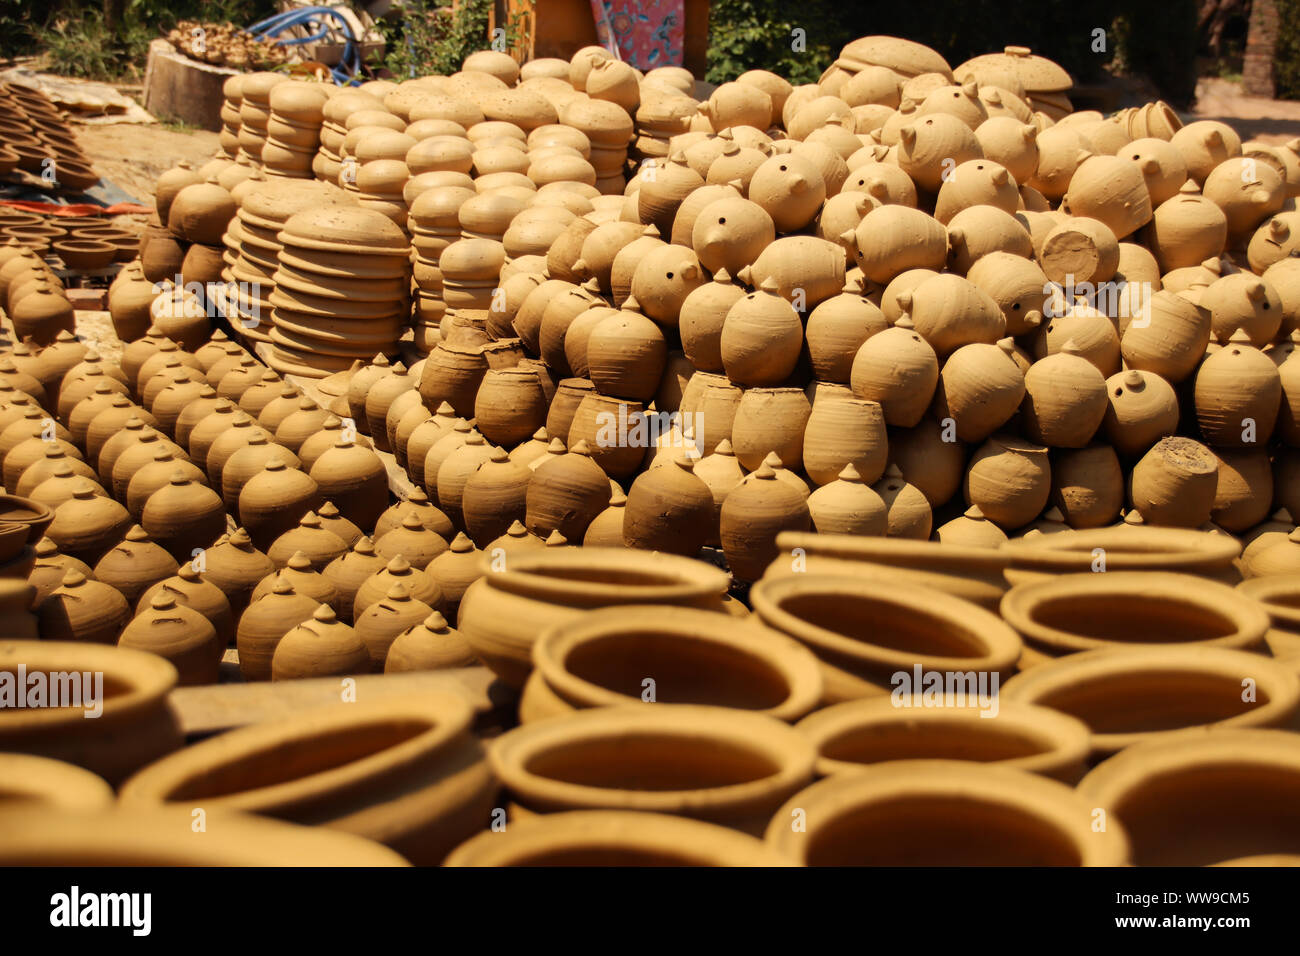 Clay pottery sold as souvenirs to tourist at Thanh Ha Pottery Village in Hoi An, Vietnam Stock Photo